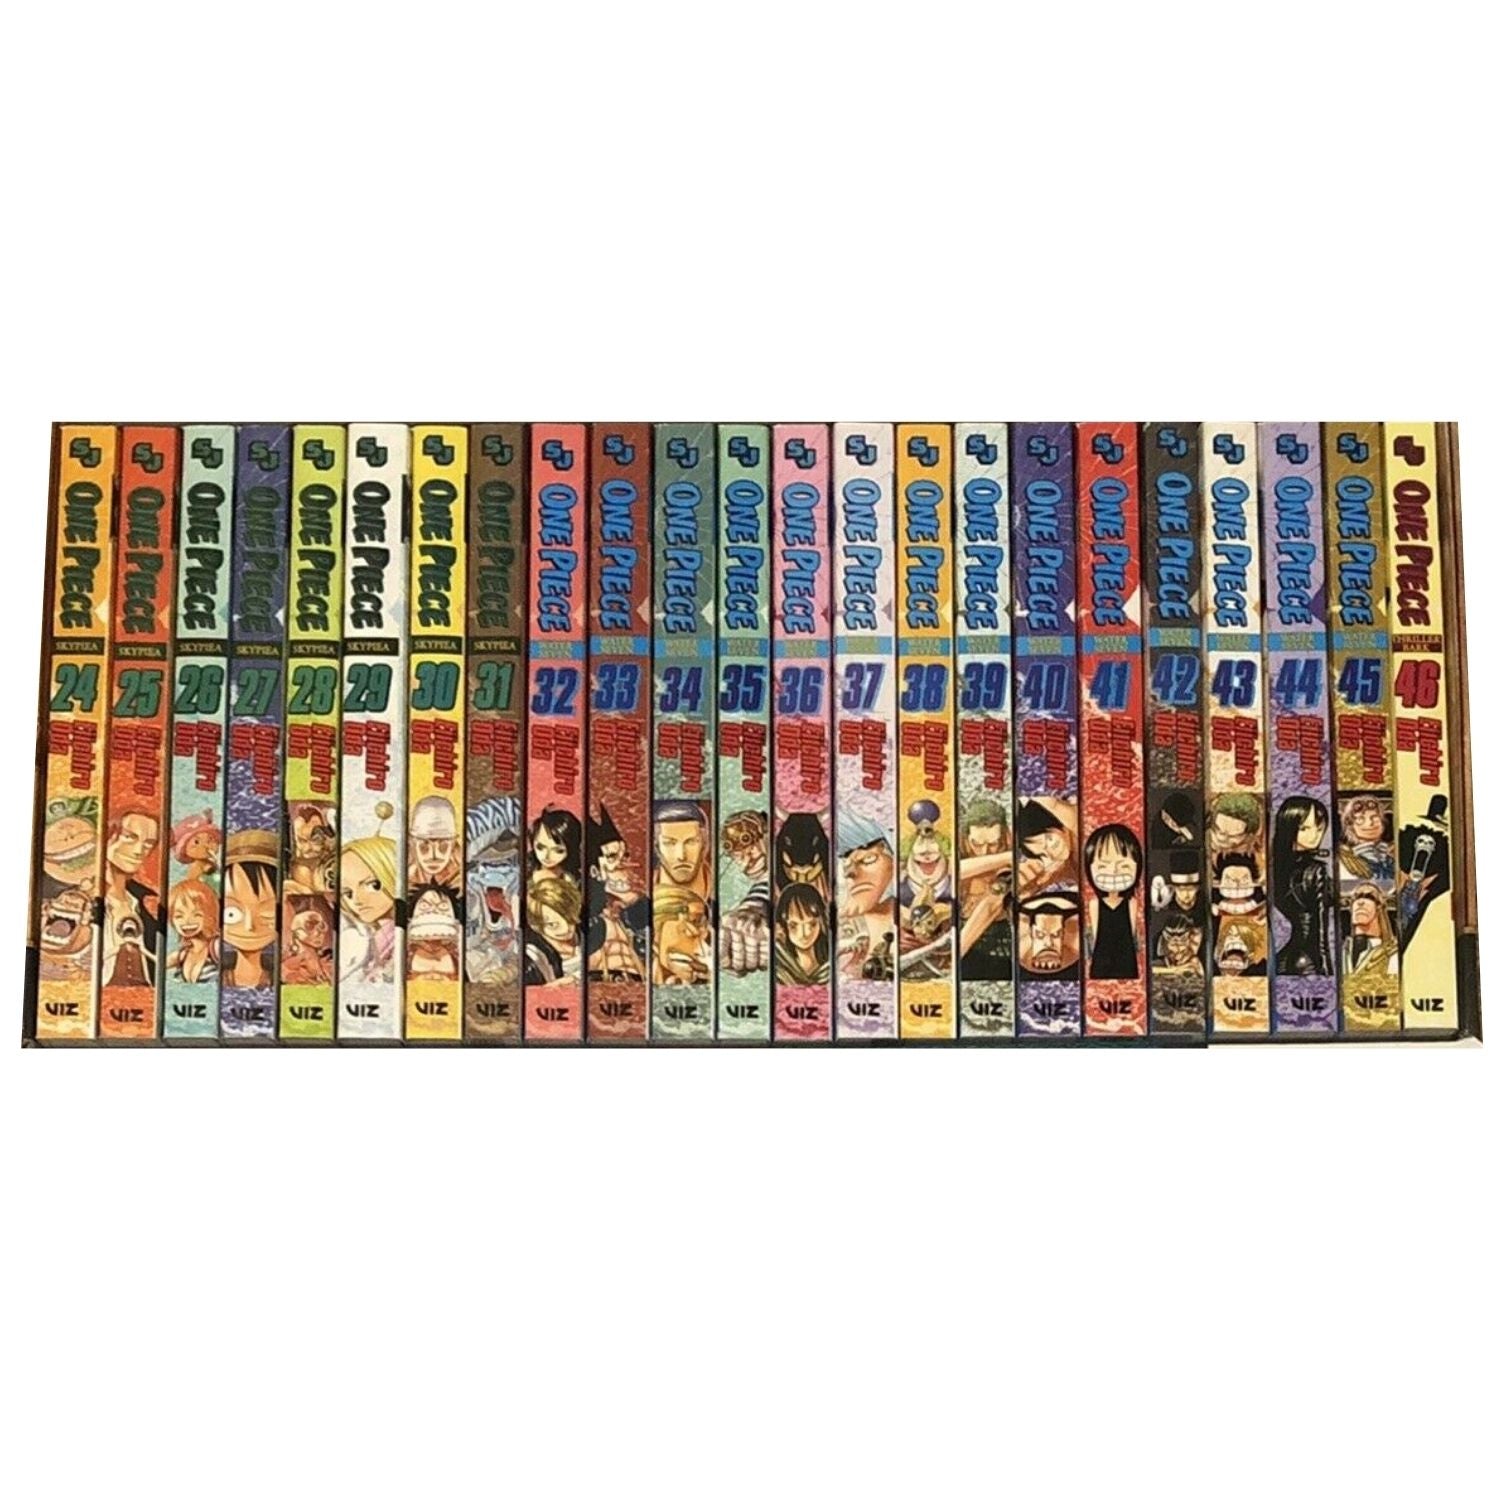 One Piece Collection Set 2: Vol 24-46(No Box/Poster-Just Books) -  Targetgears